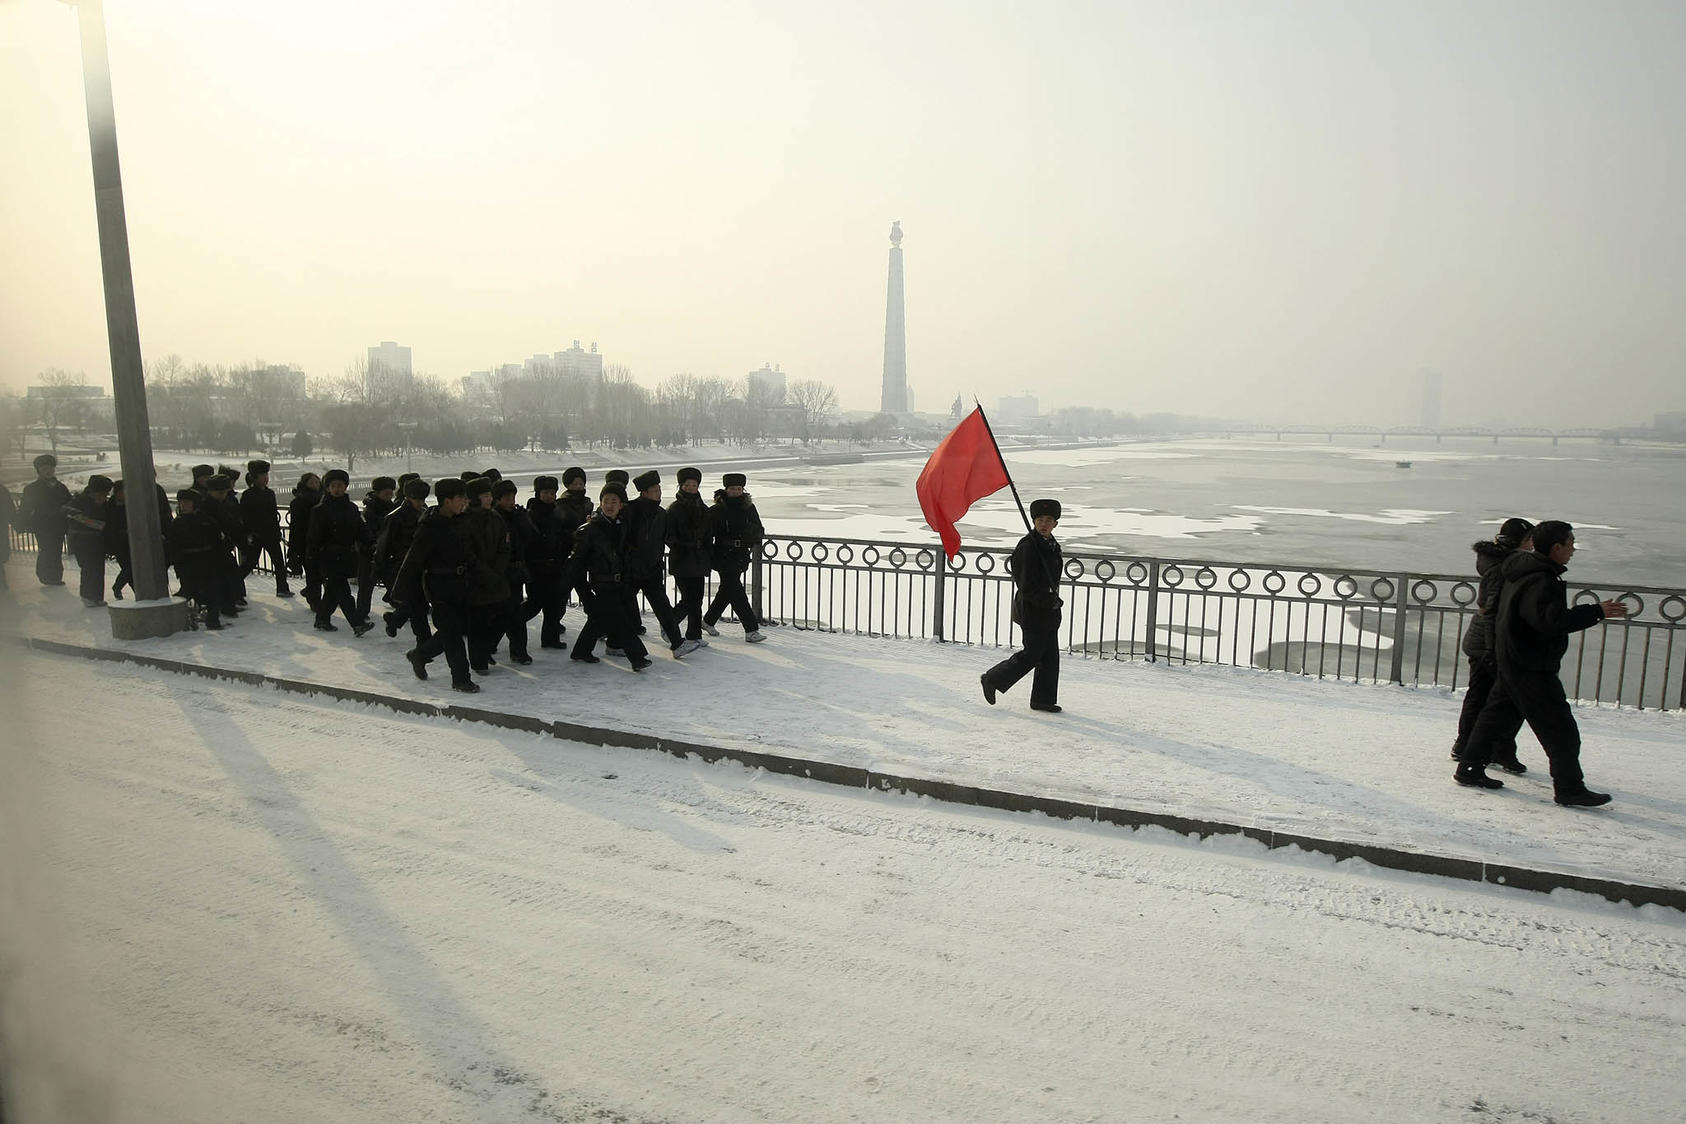 Soldiers cross a bridge over the Dae Dong river, in Pyongyang, North Korea, Feb. 26, 2008. (Chang W. Lee/The New York Times)